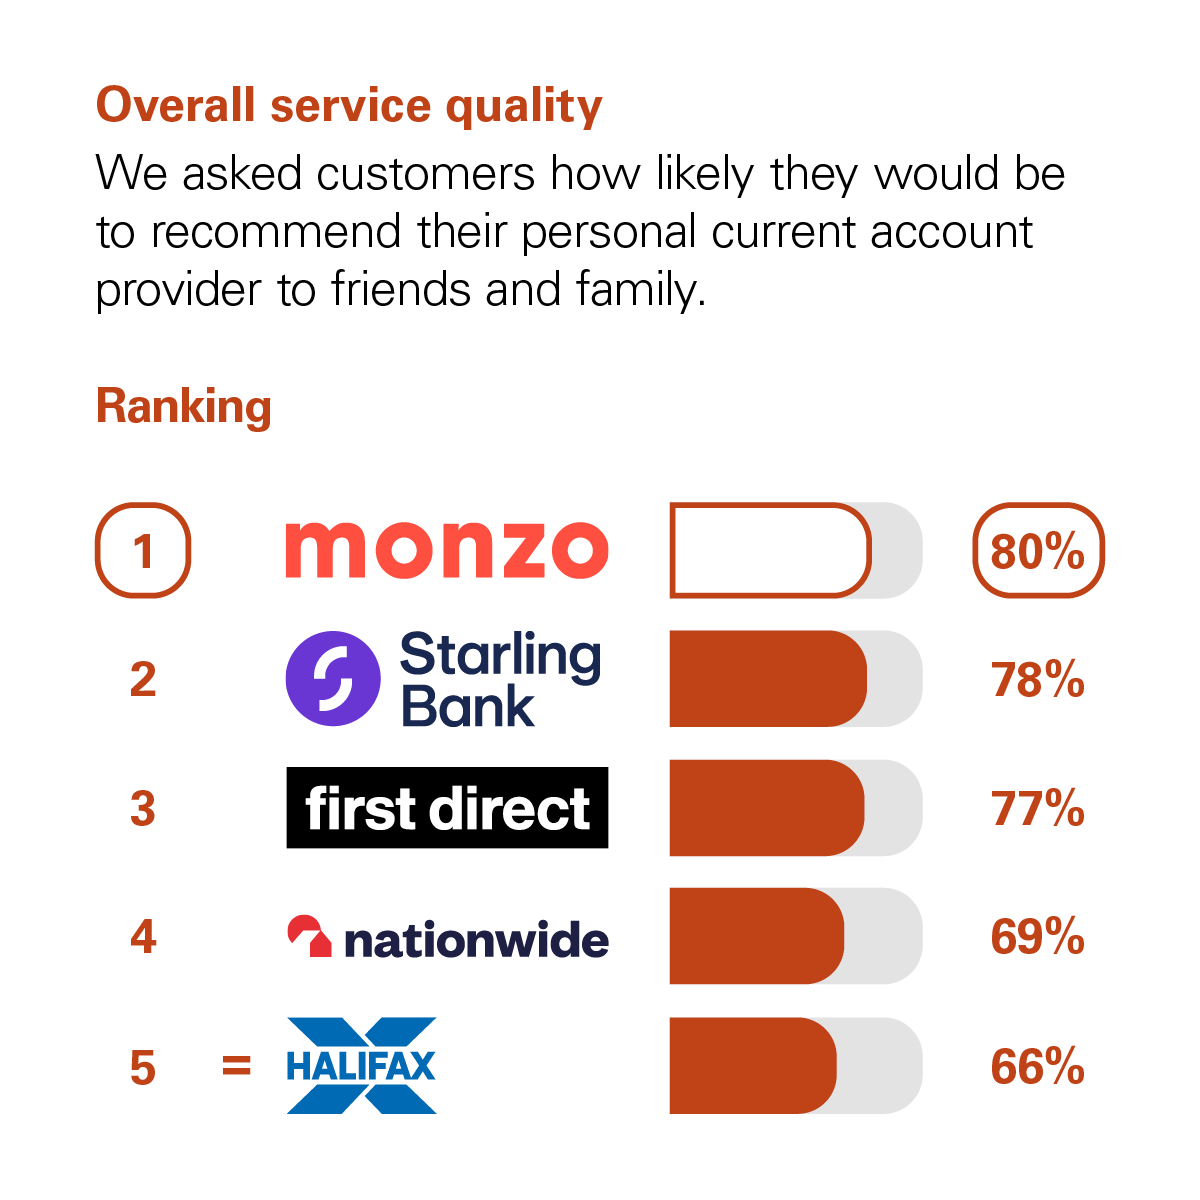 Graph showing the results of the CMA scoring of UK banks in the Overall Service Quality category. The CMA asked customers how likely they would be to recommend their personal current account provider to friends and family. The rankings with percentage scores are: 1st Monzo with 80%. 2nd Starling Bank with 78%. 3rd First Direct with 77%. 4th Nationwide with 69% and Halifax with 66%.